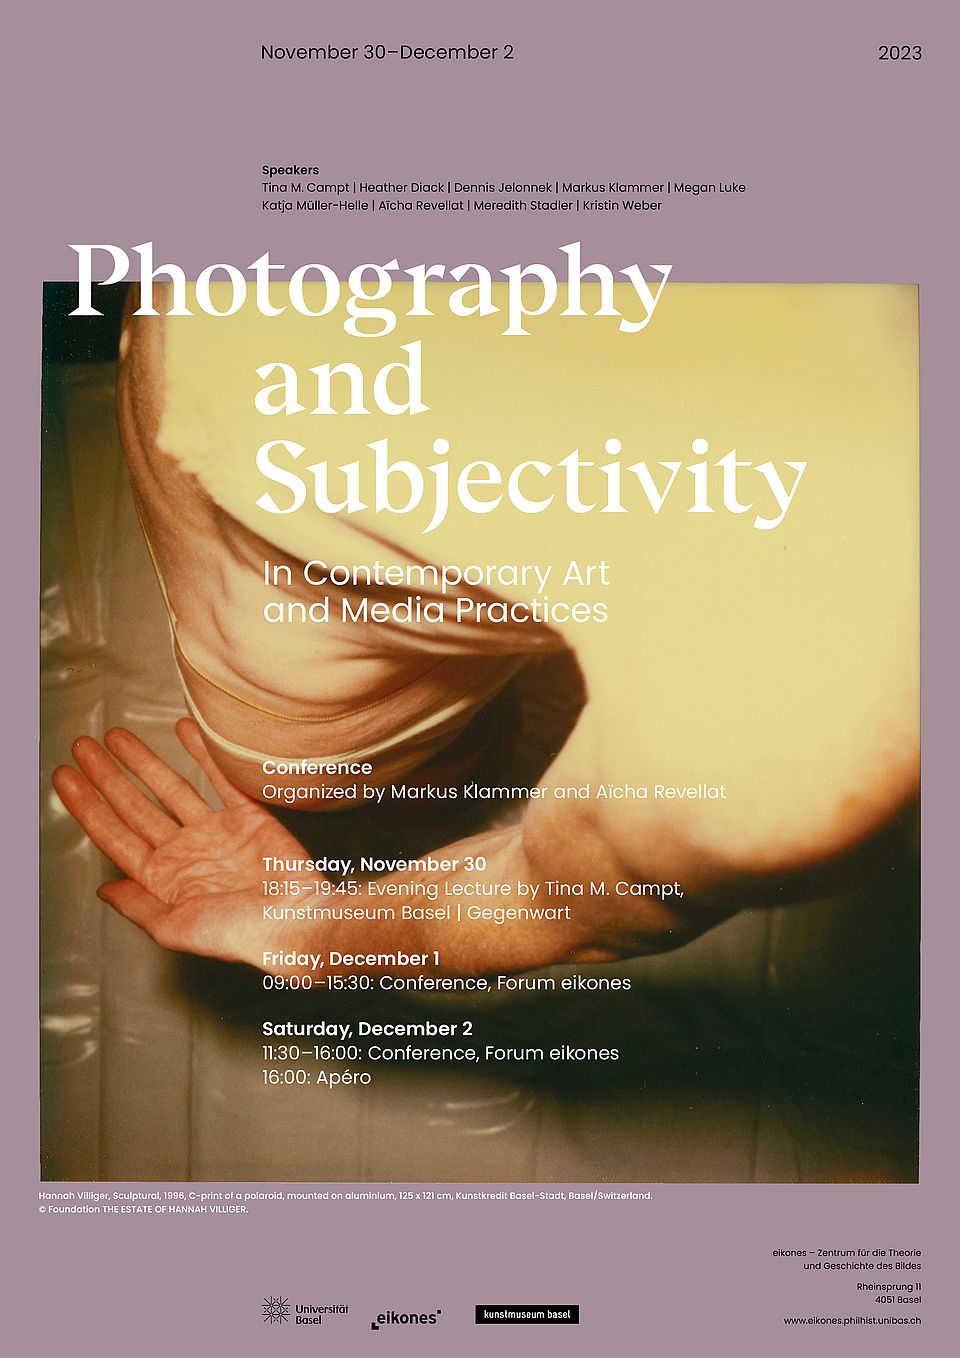 Poster for the conference "Photography and Subjectivity"